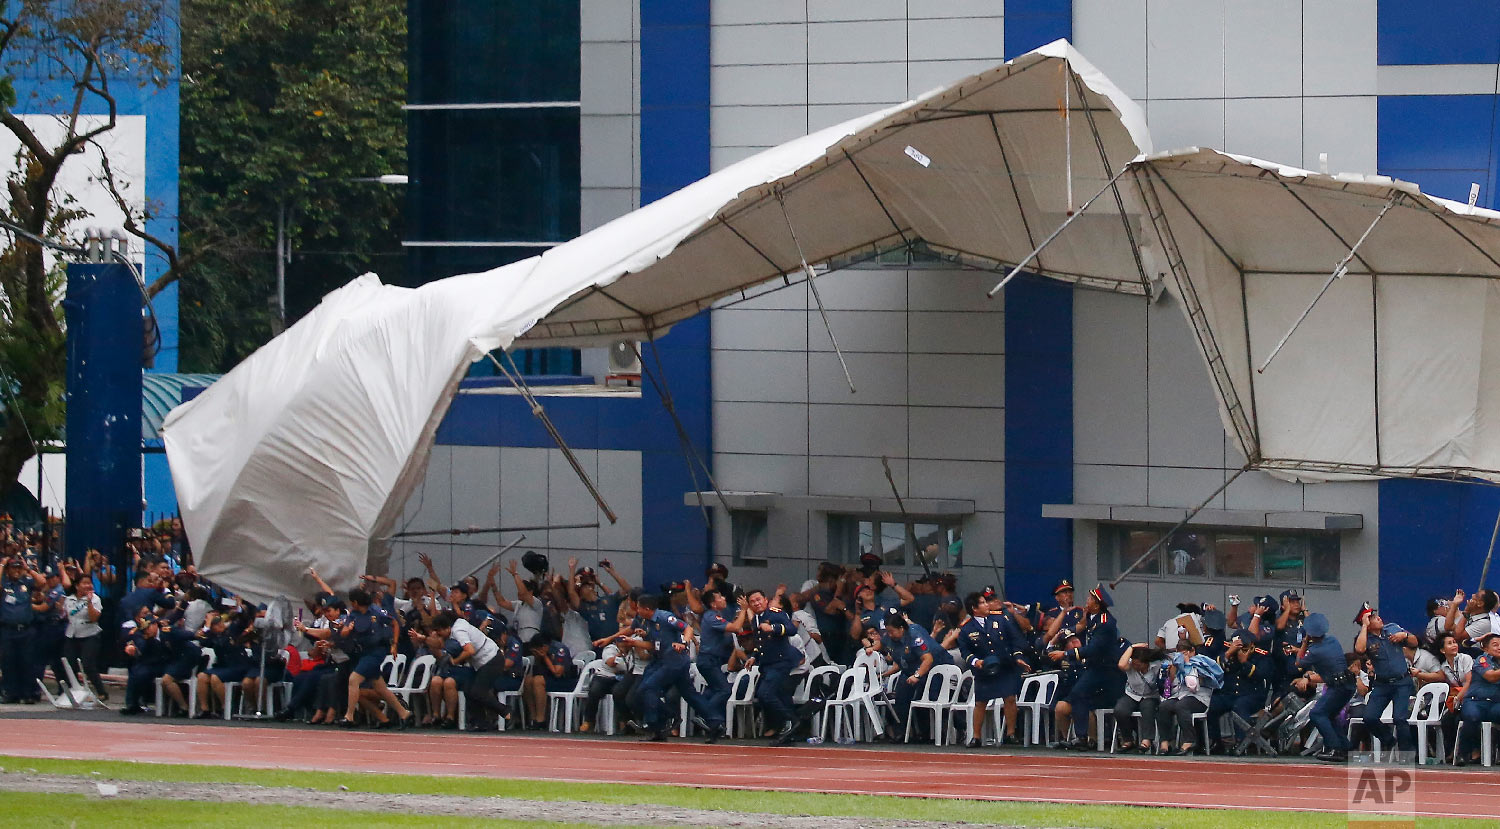  Philippine National Police officers and employees react as their tent is toppled by the downwash of a hovering police helicopter performing a salute during the 117th Philippine National Police Service anniversary at Camp Crame in Quezon City, a subu